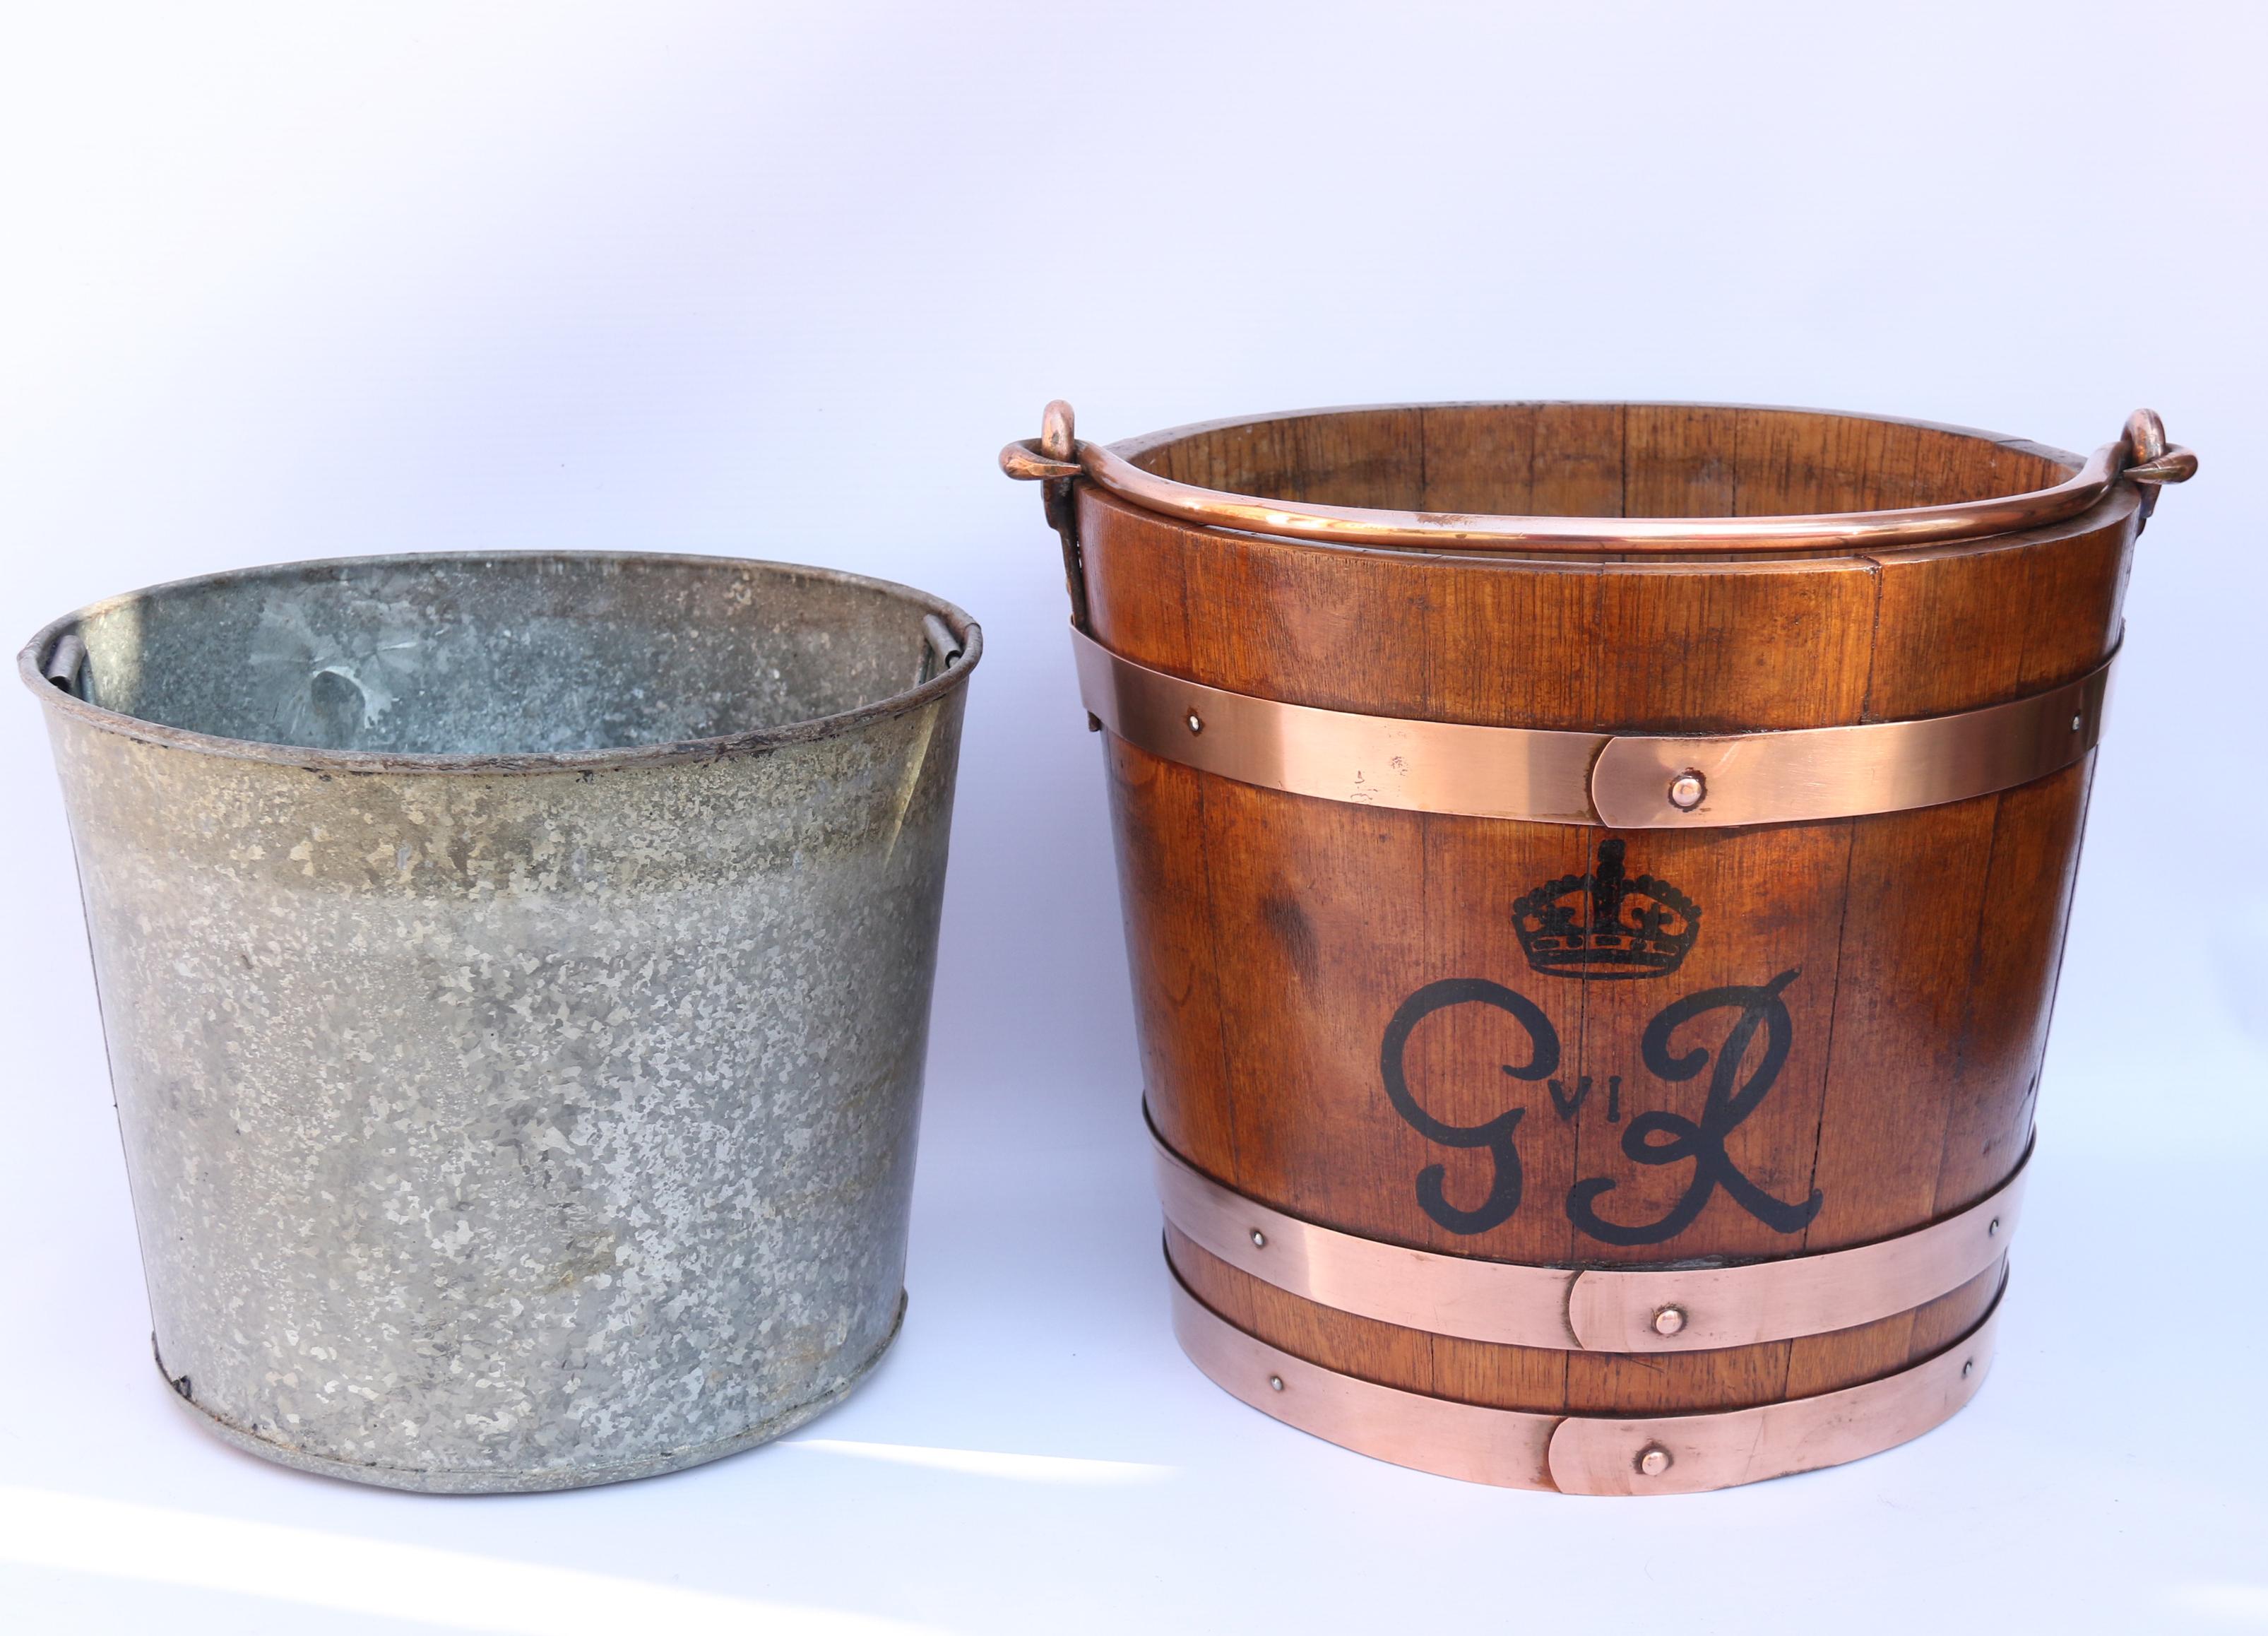 Antique English Oak Bucket to Commemorate the coronation of George VI in 1936 For Sale 2